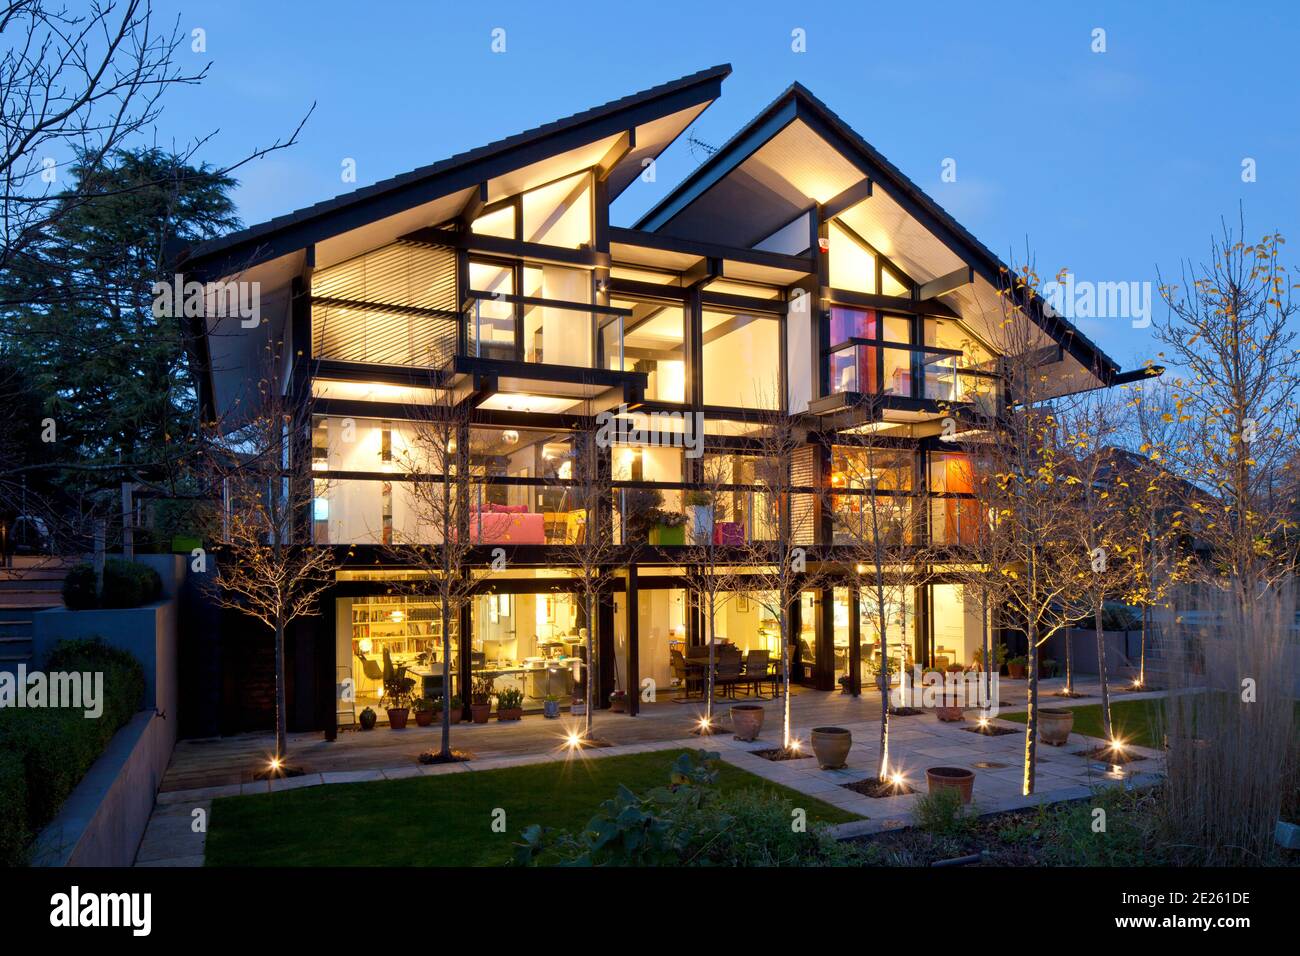 Rear elevation of Huf Haus at dusk with all lights on and illuminated trees in landscaped garden Stock Photo